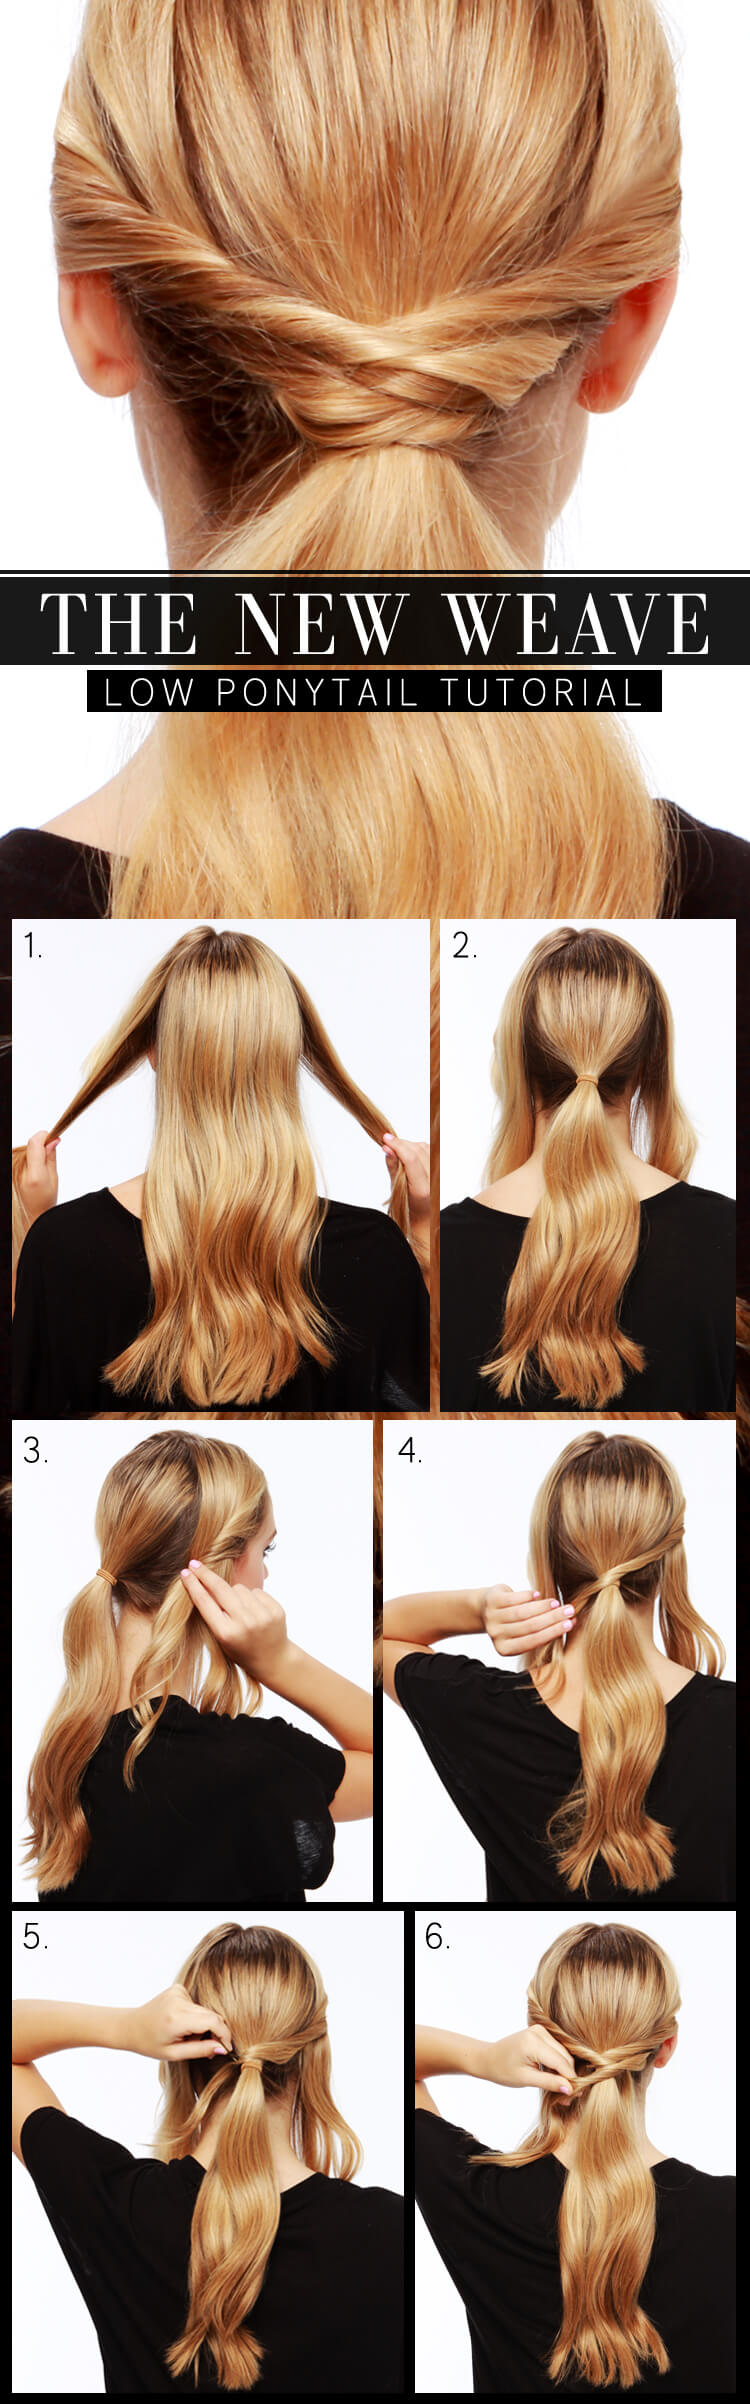 Woven Low Ponytail Tutorial by LuLu*s